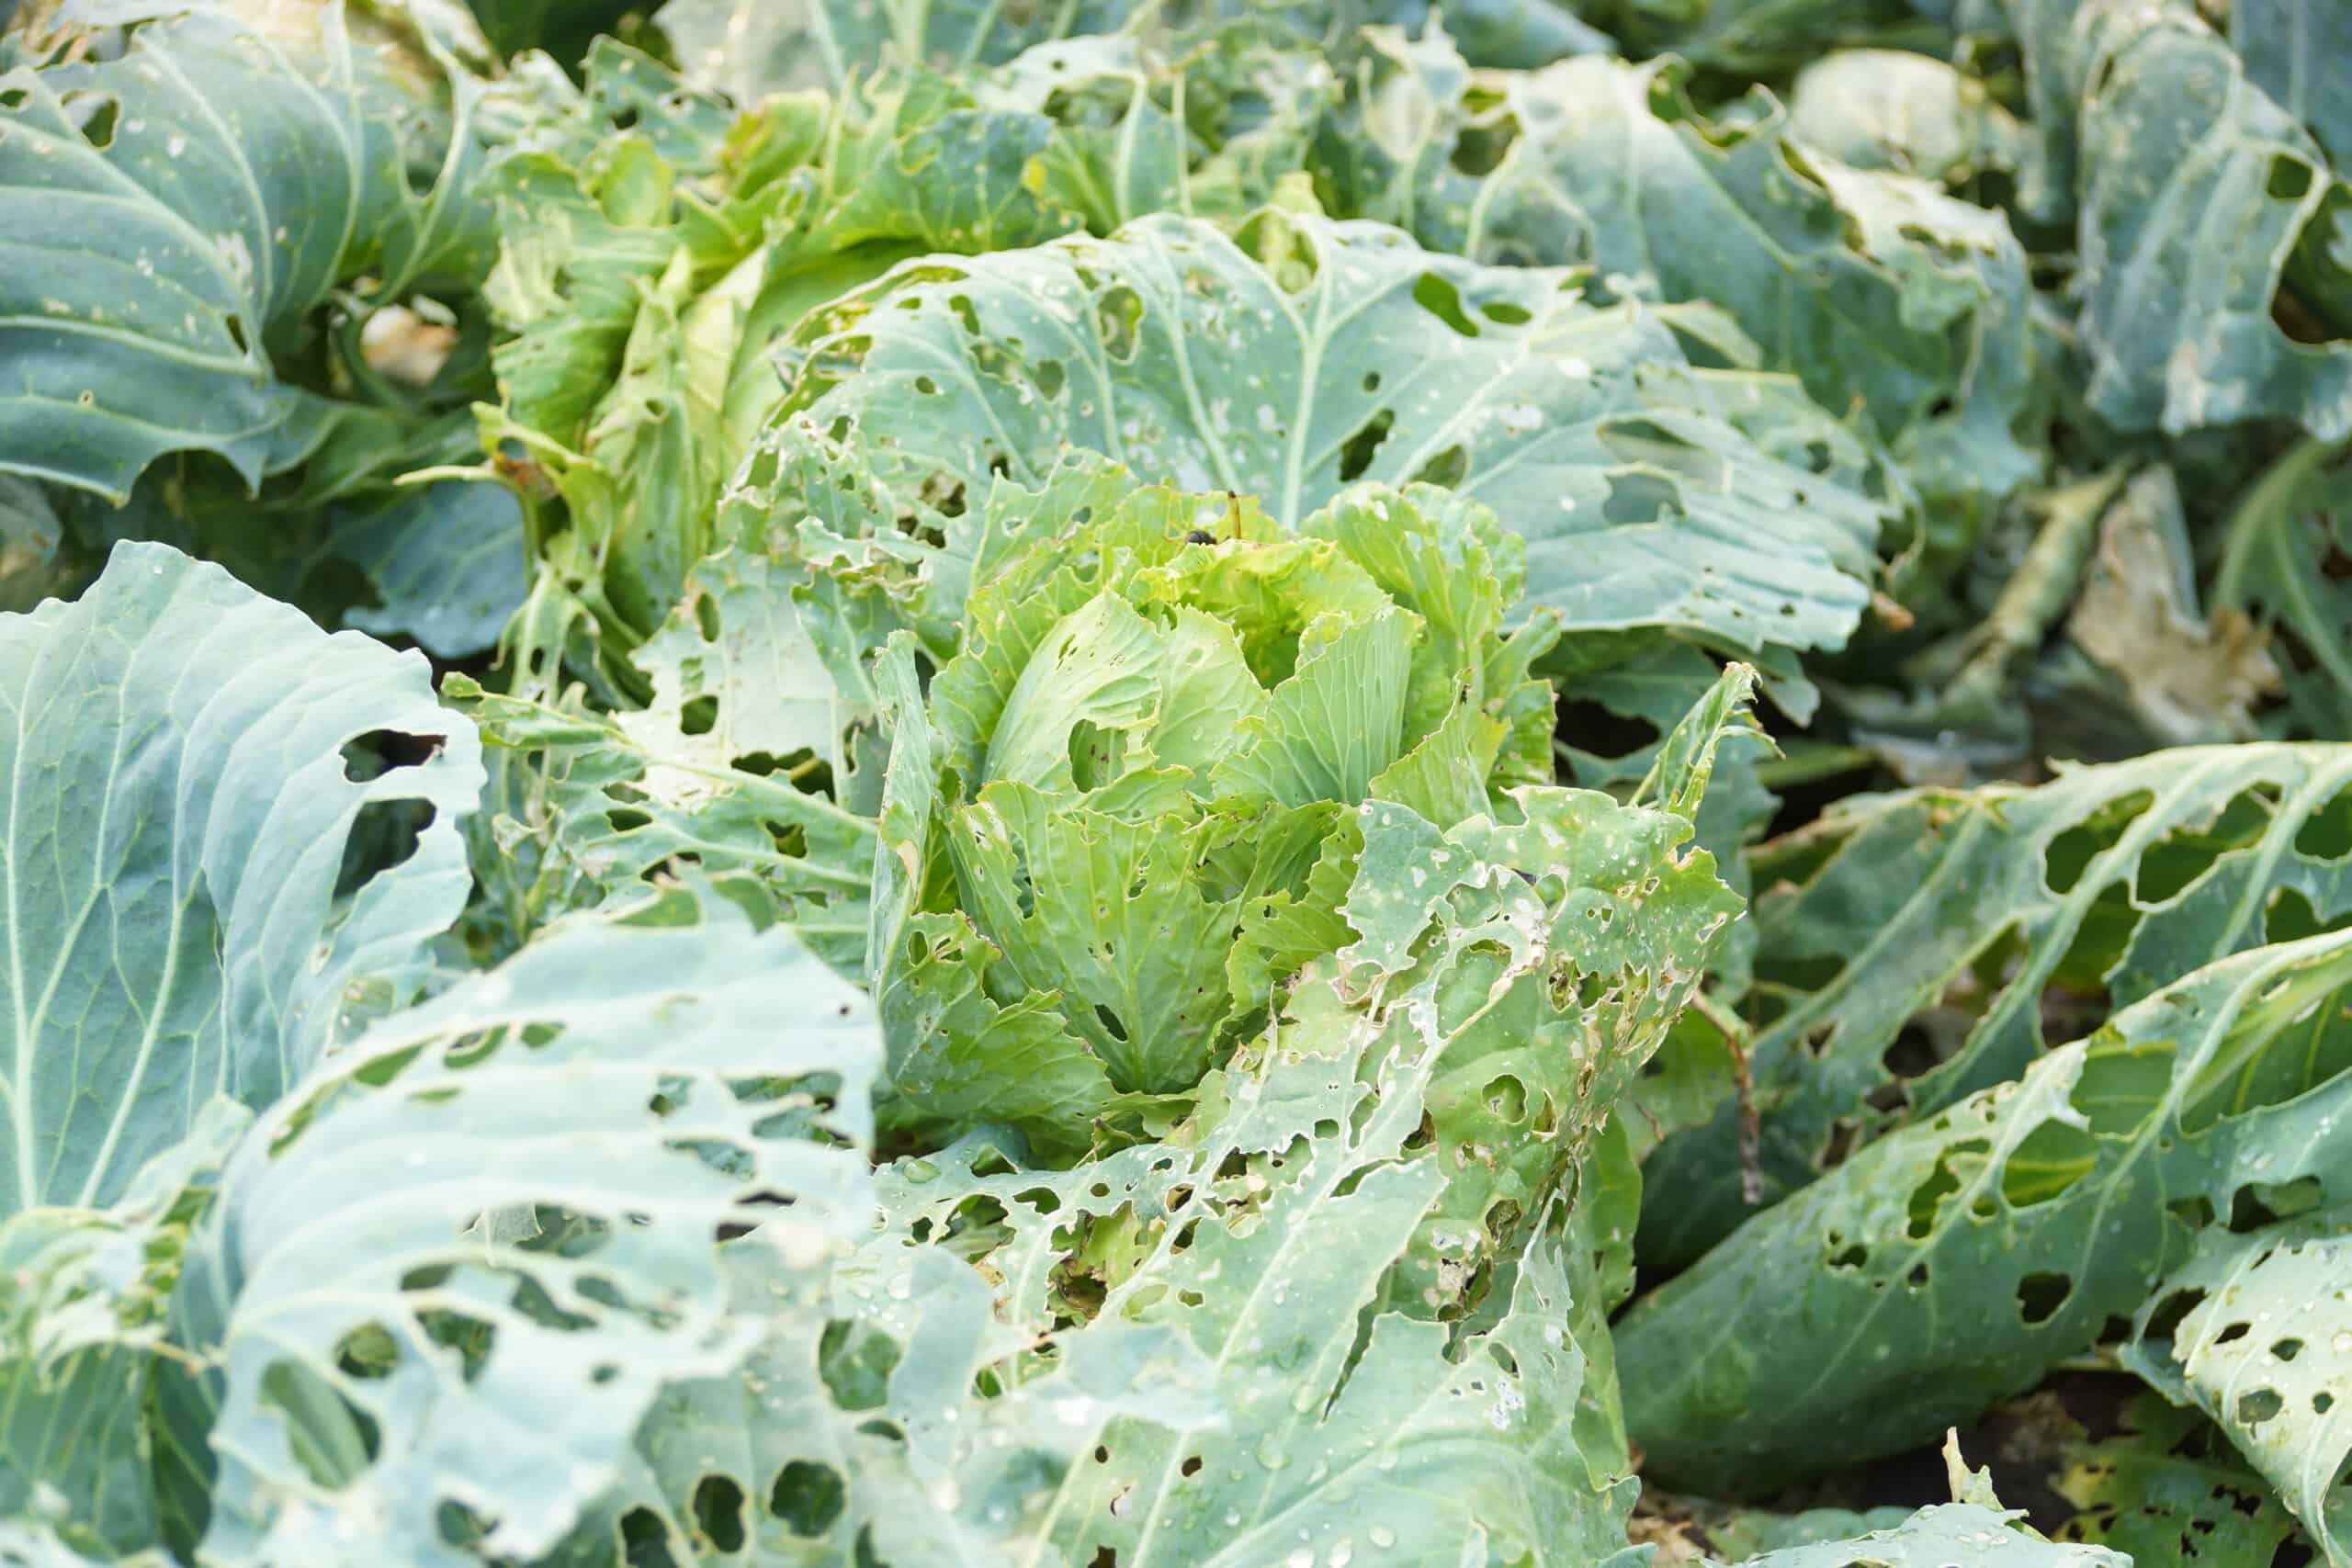 Cabbage must be protected from pest insect